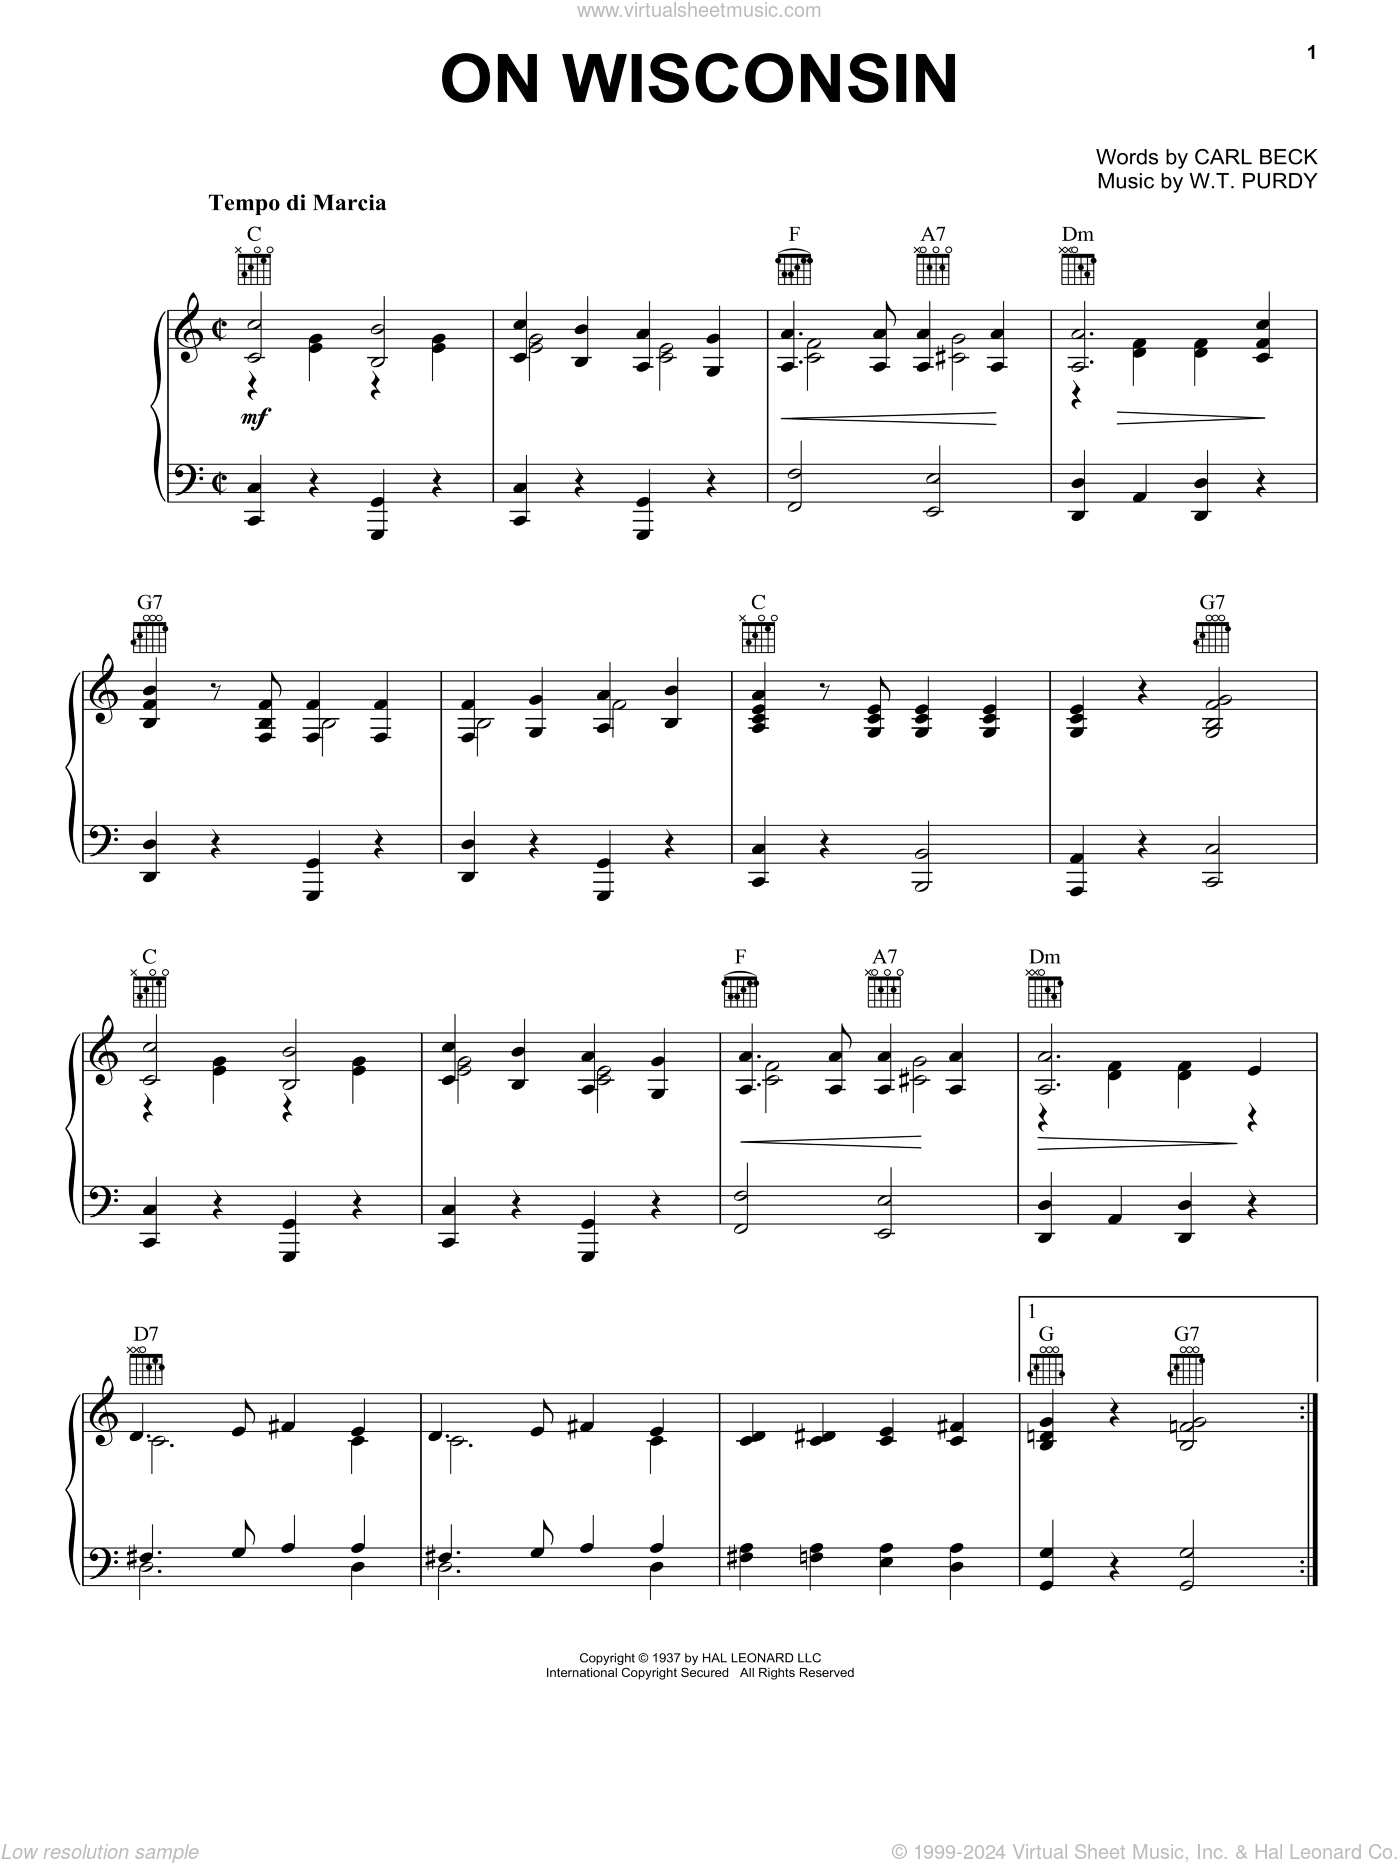 On Wisconsin! sheet music for voice, piano or guitar (PDF)